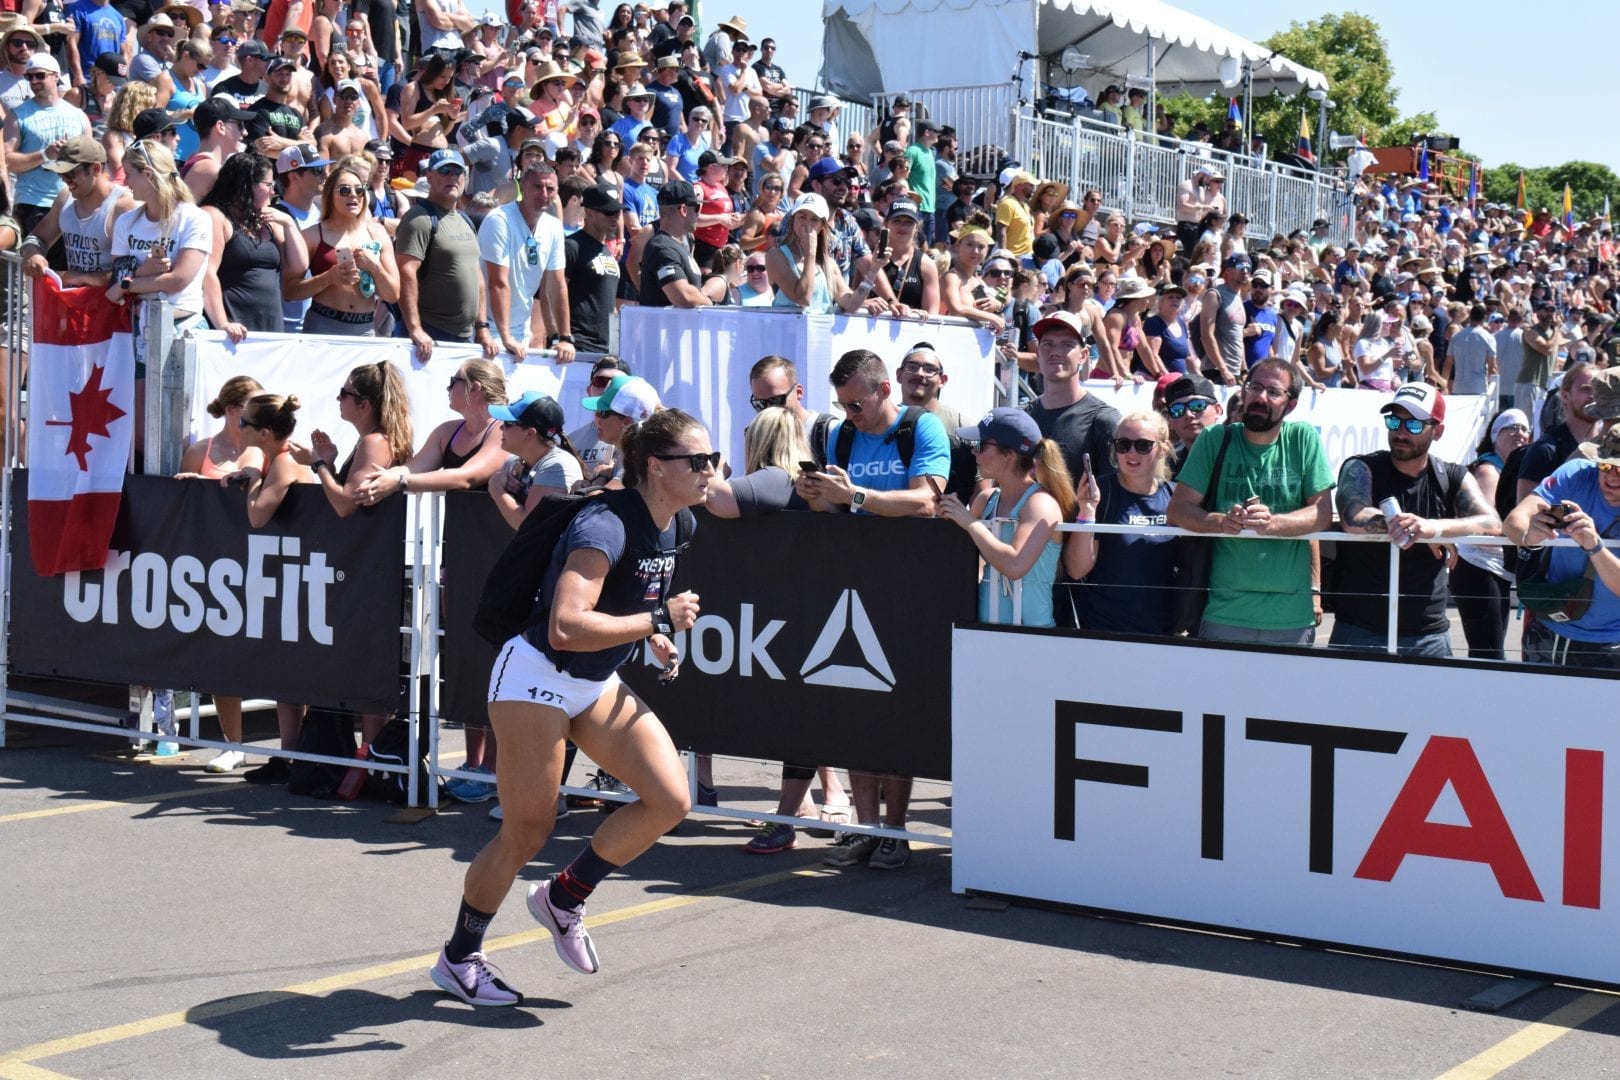 Karin Freyova completes the Ruck Run event at the 2019 CrossFit Games